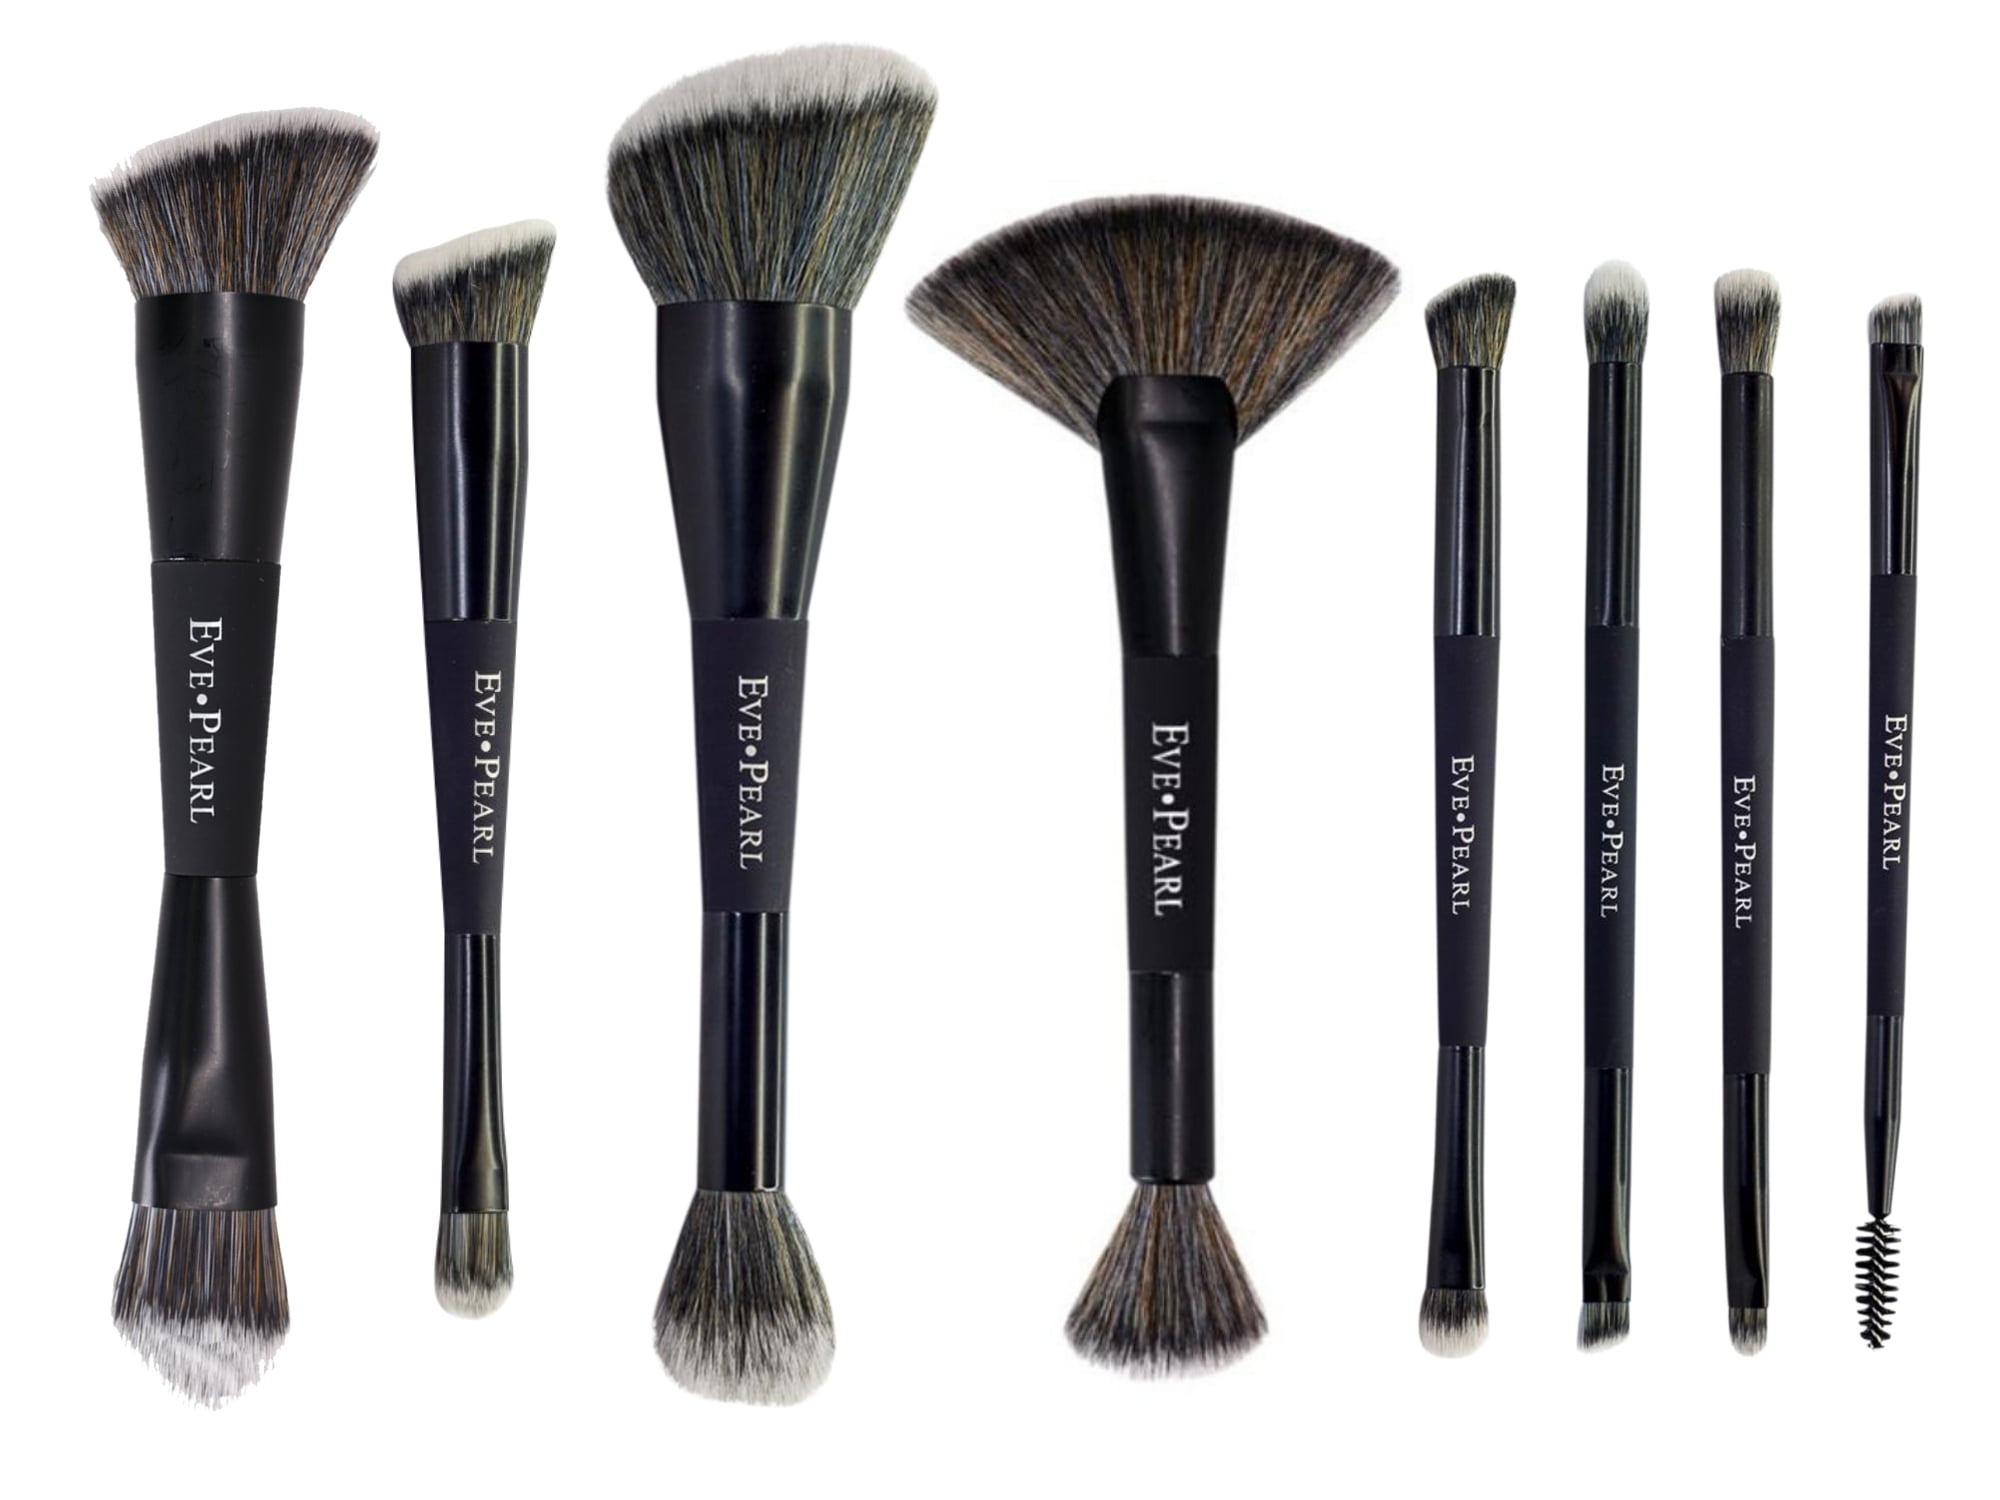 CHANEL PINCEAU KABUKI RETRACTABLE N 108 RETRACTABLE POWDER BRUSH - Compare  Prices & Where To Buy 